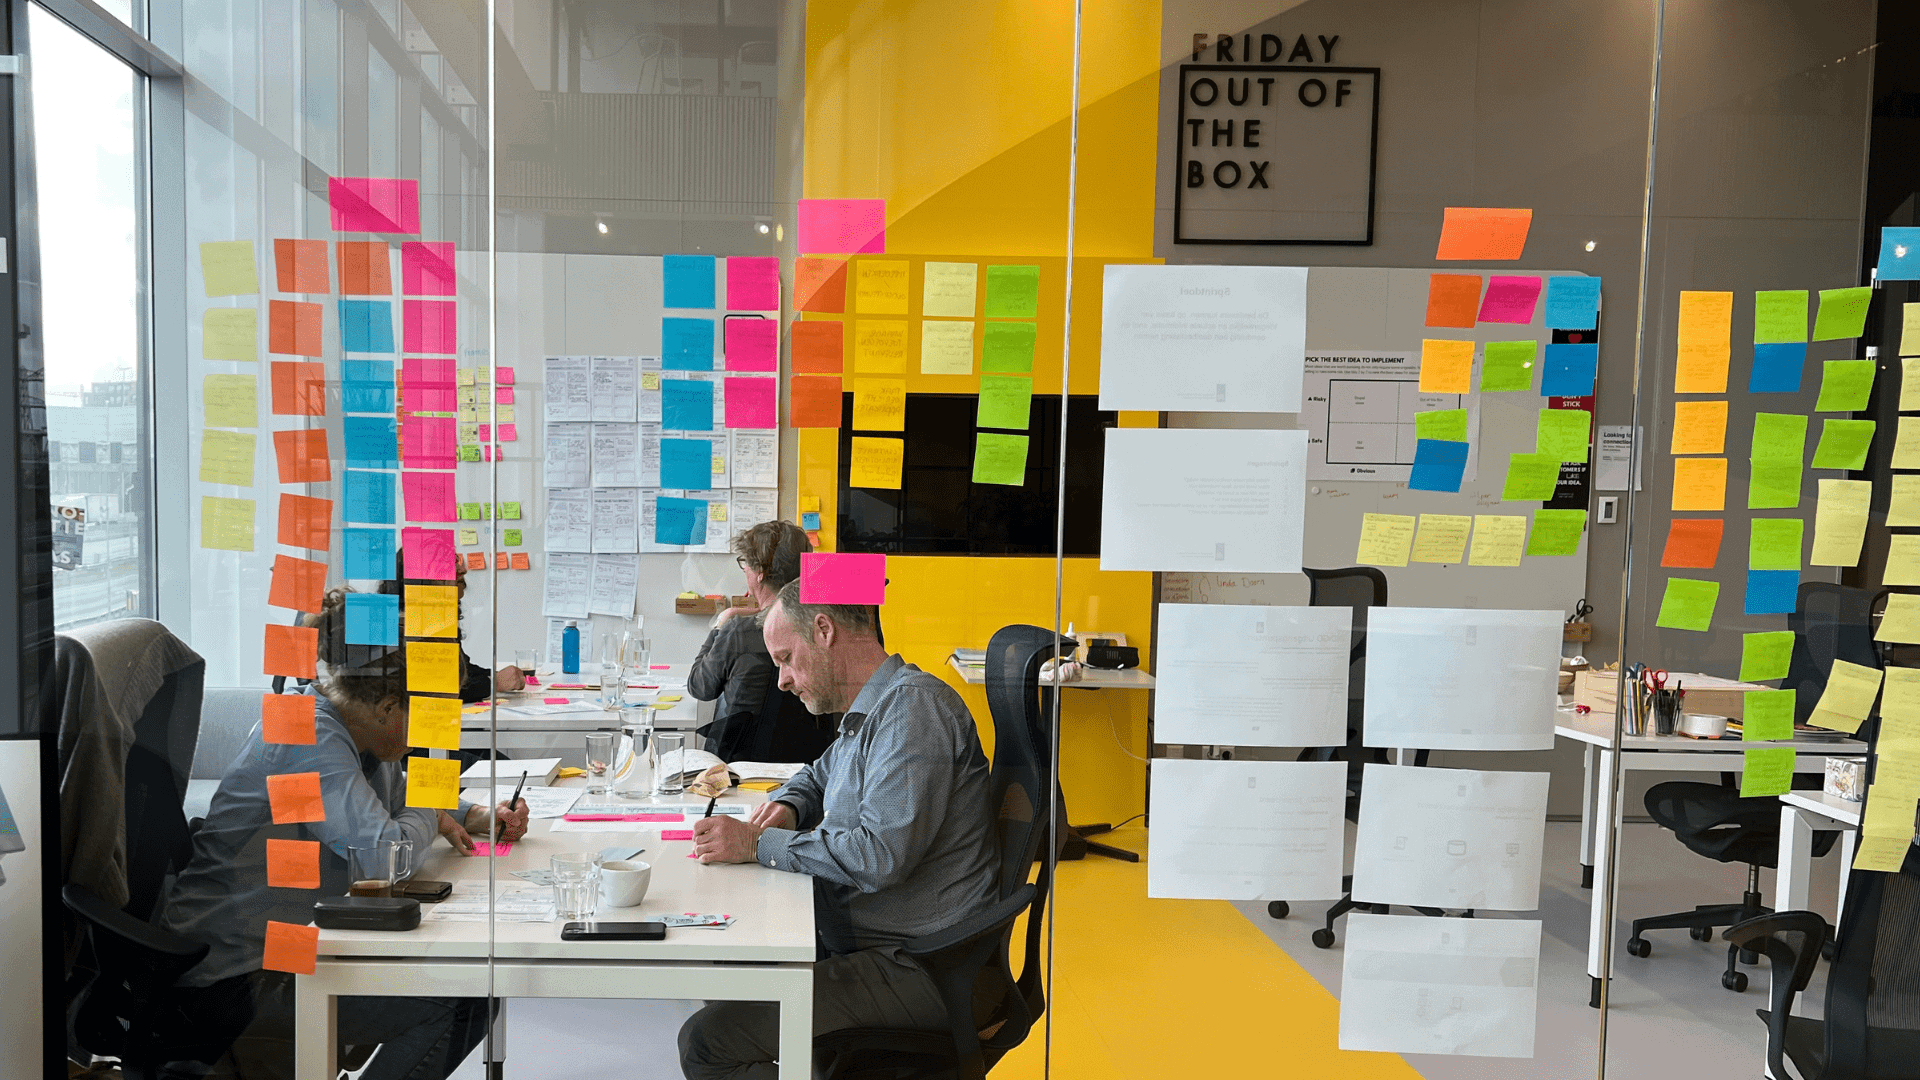 Design thinking training |Friday out of the Box